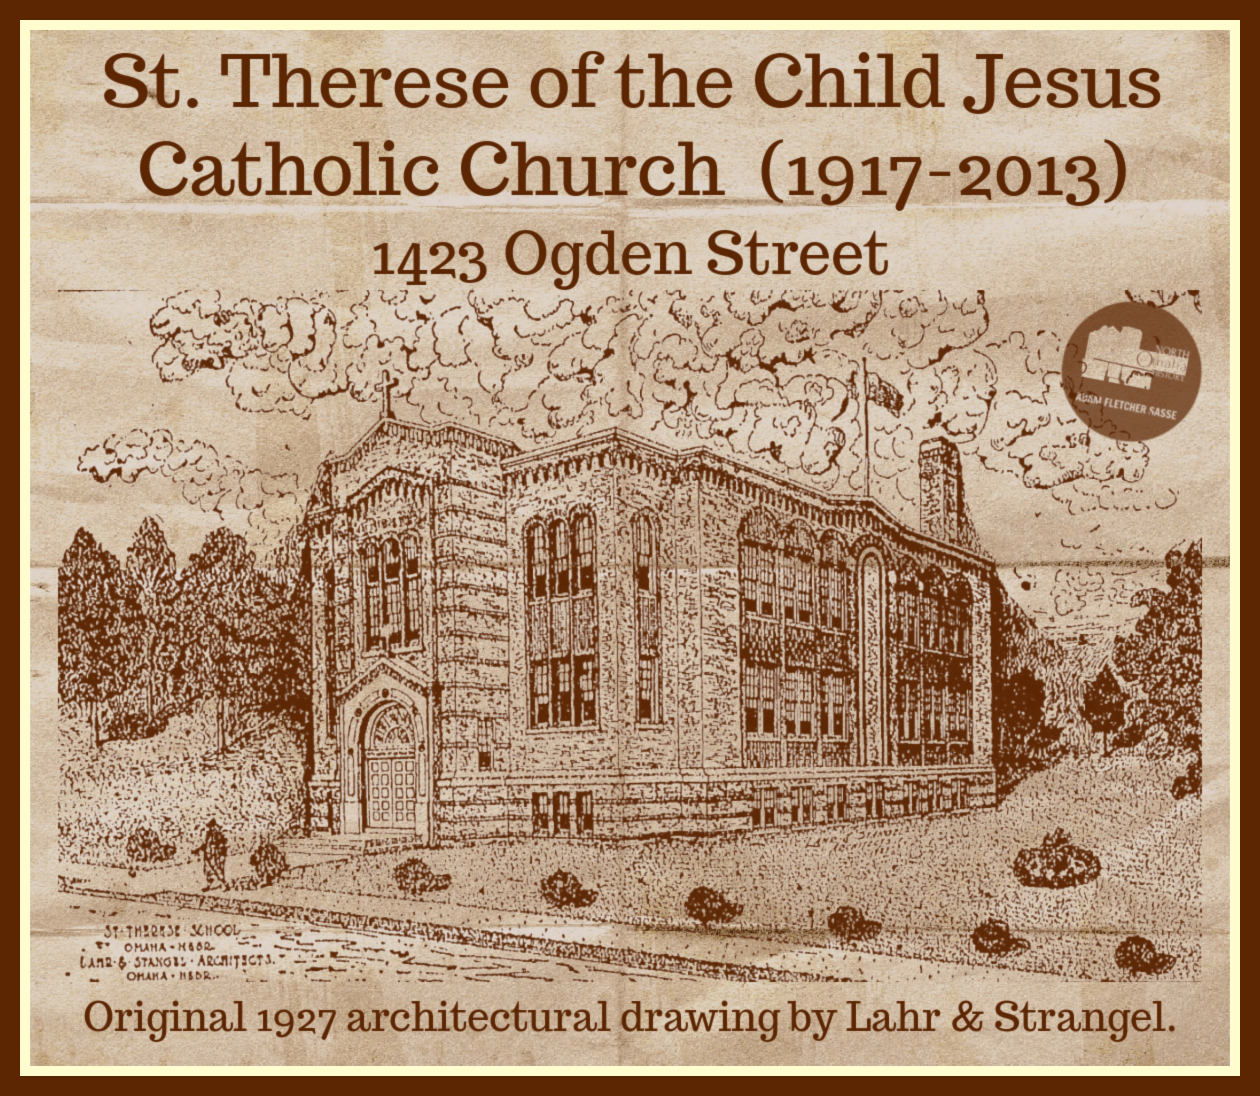 This is an original 1927 architectural drawing of the St Therese of the Christ Child Catholic parish at 1423 Ogden Avenue from 1927 to 2013.